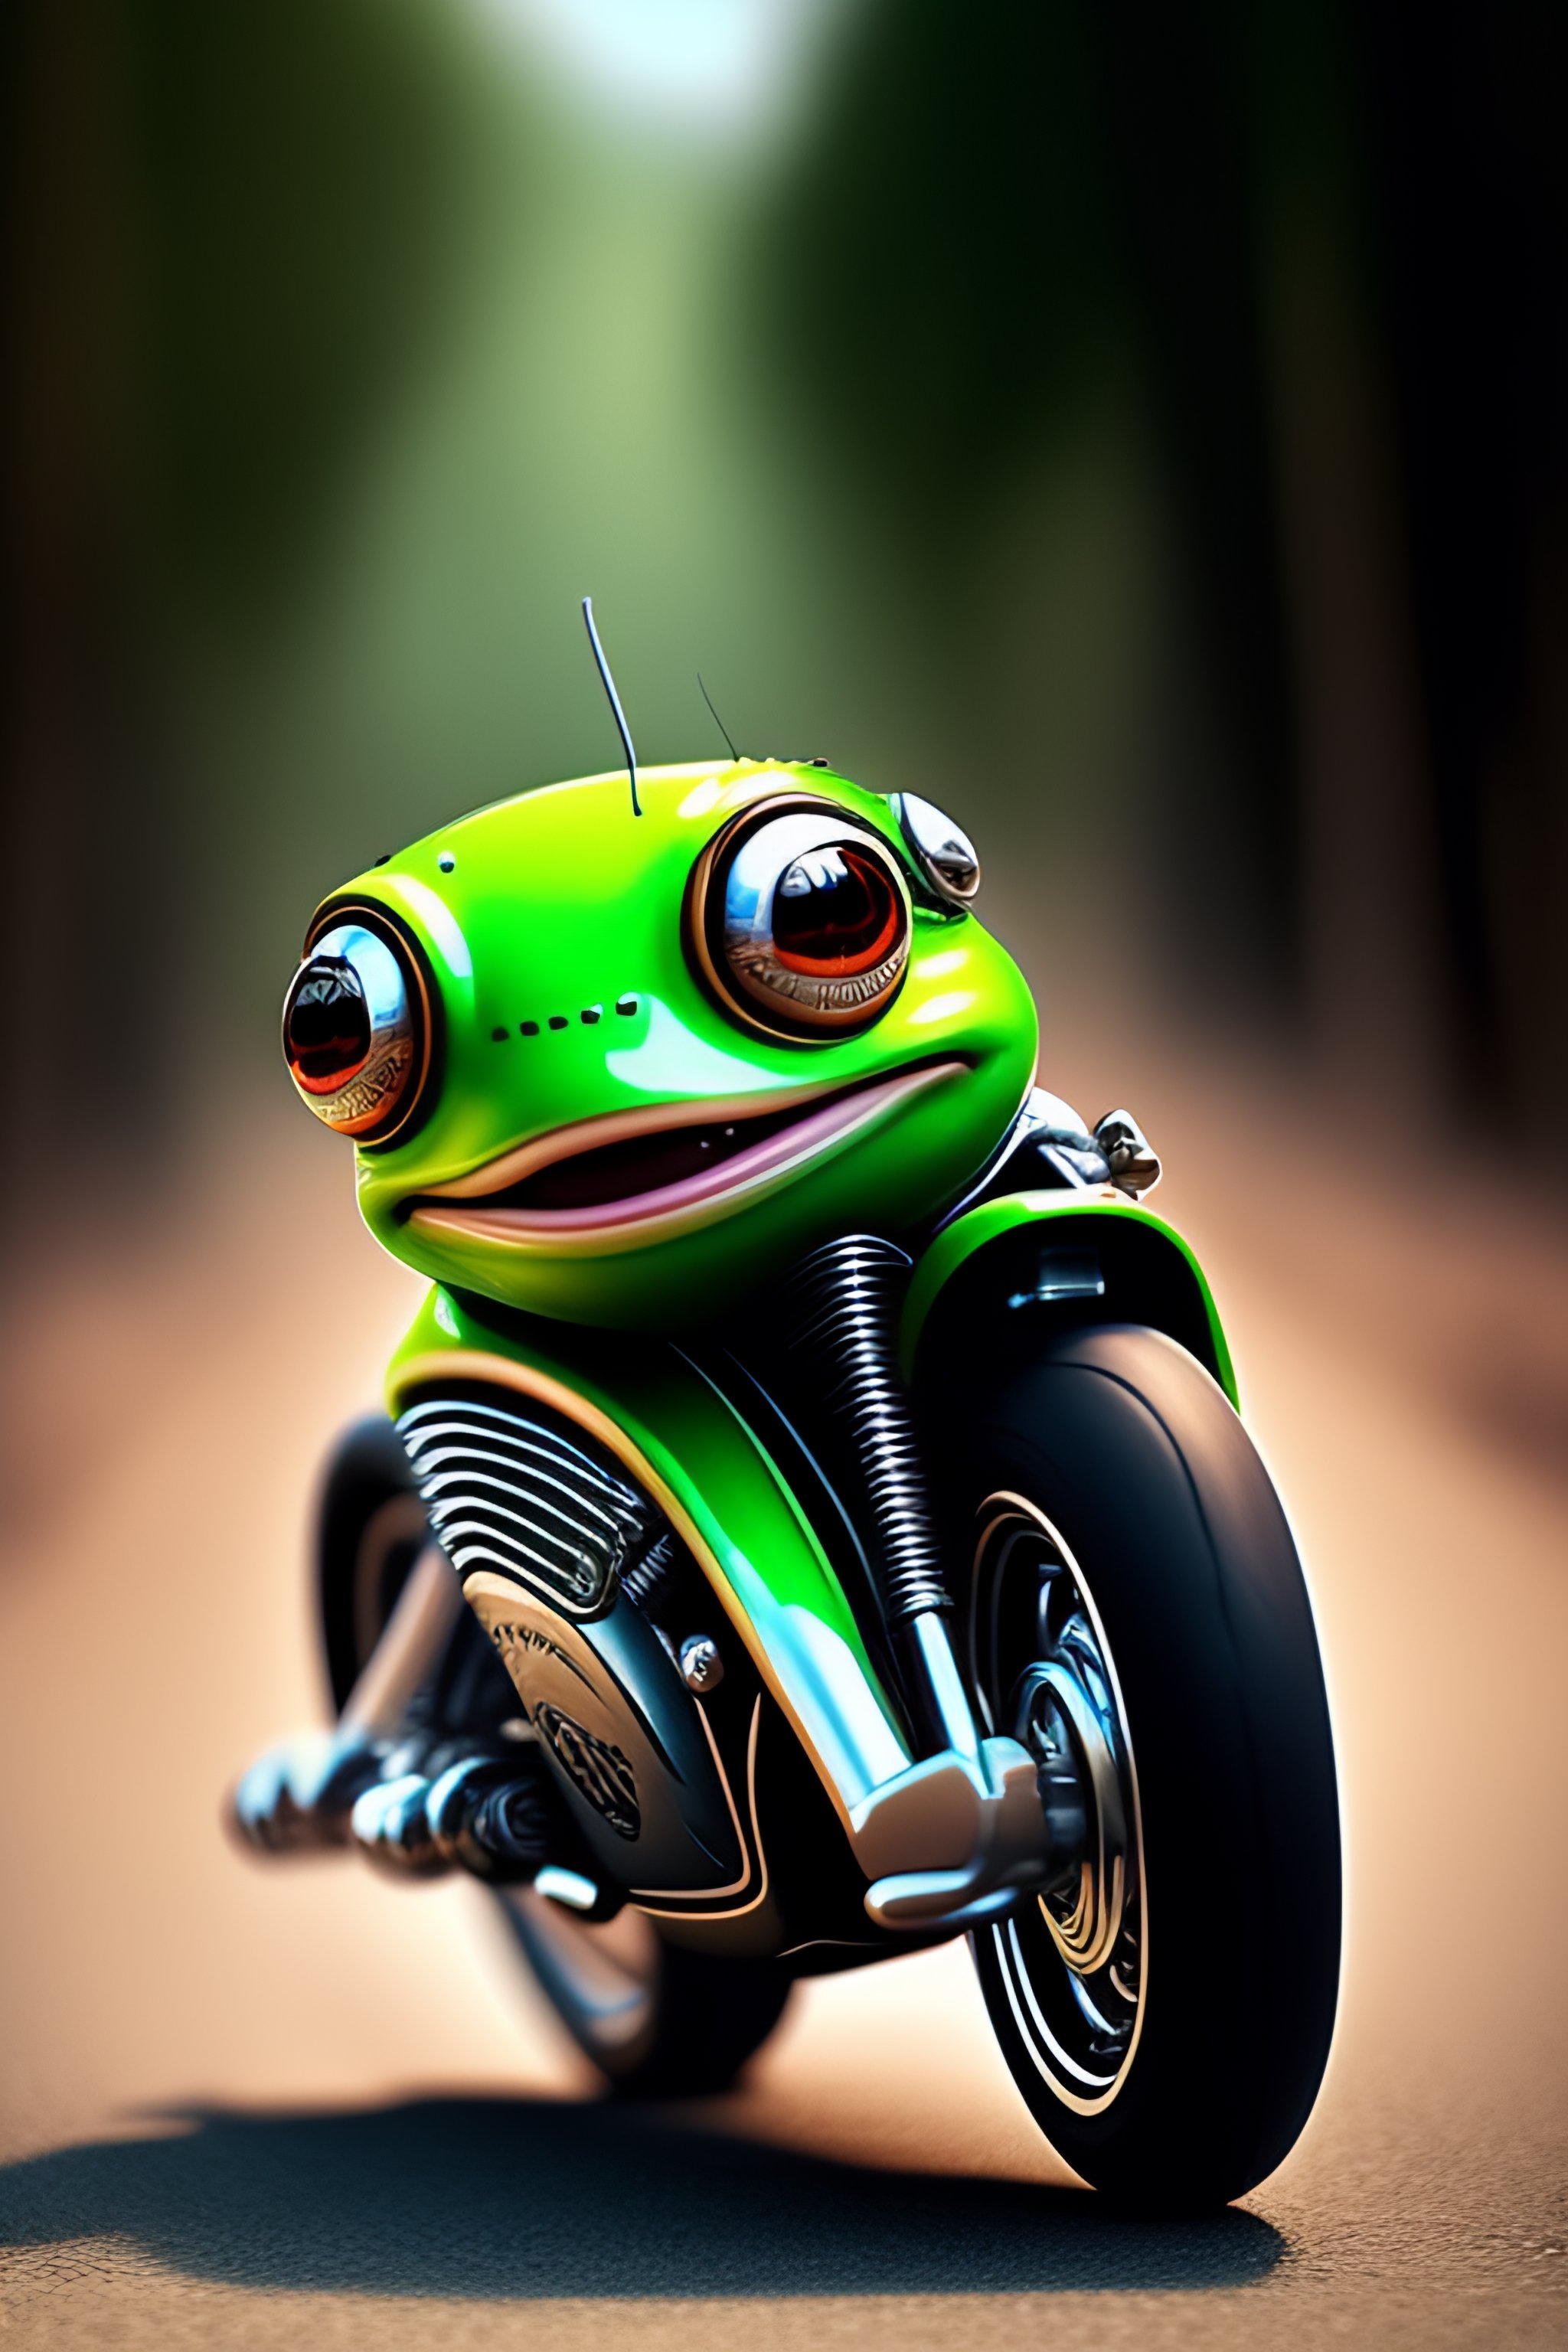 Lexica - Crazy frog, on one wheel, motorcycle, dead